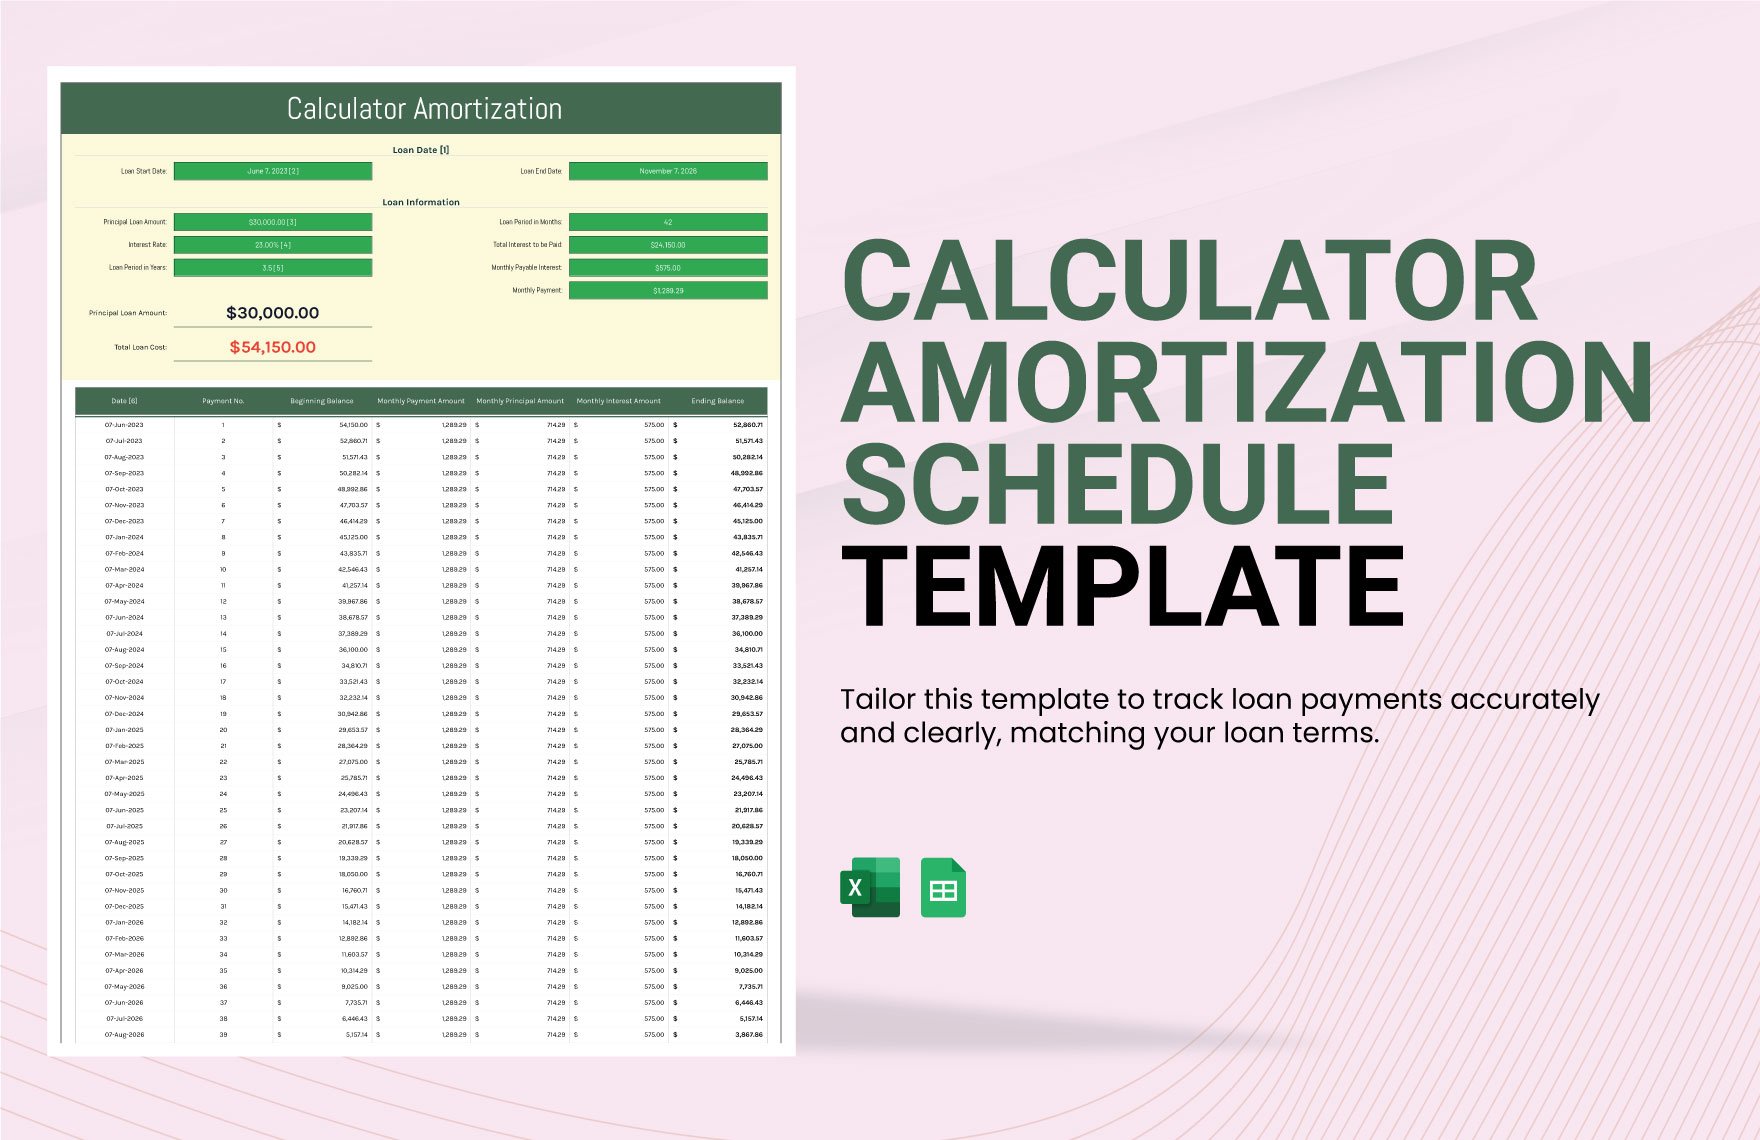 Calculator Amortization Schedule Template in Excel, Google Sheets